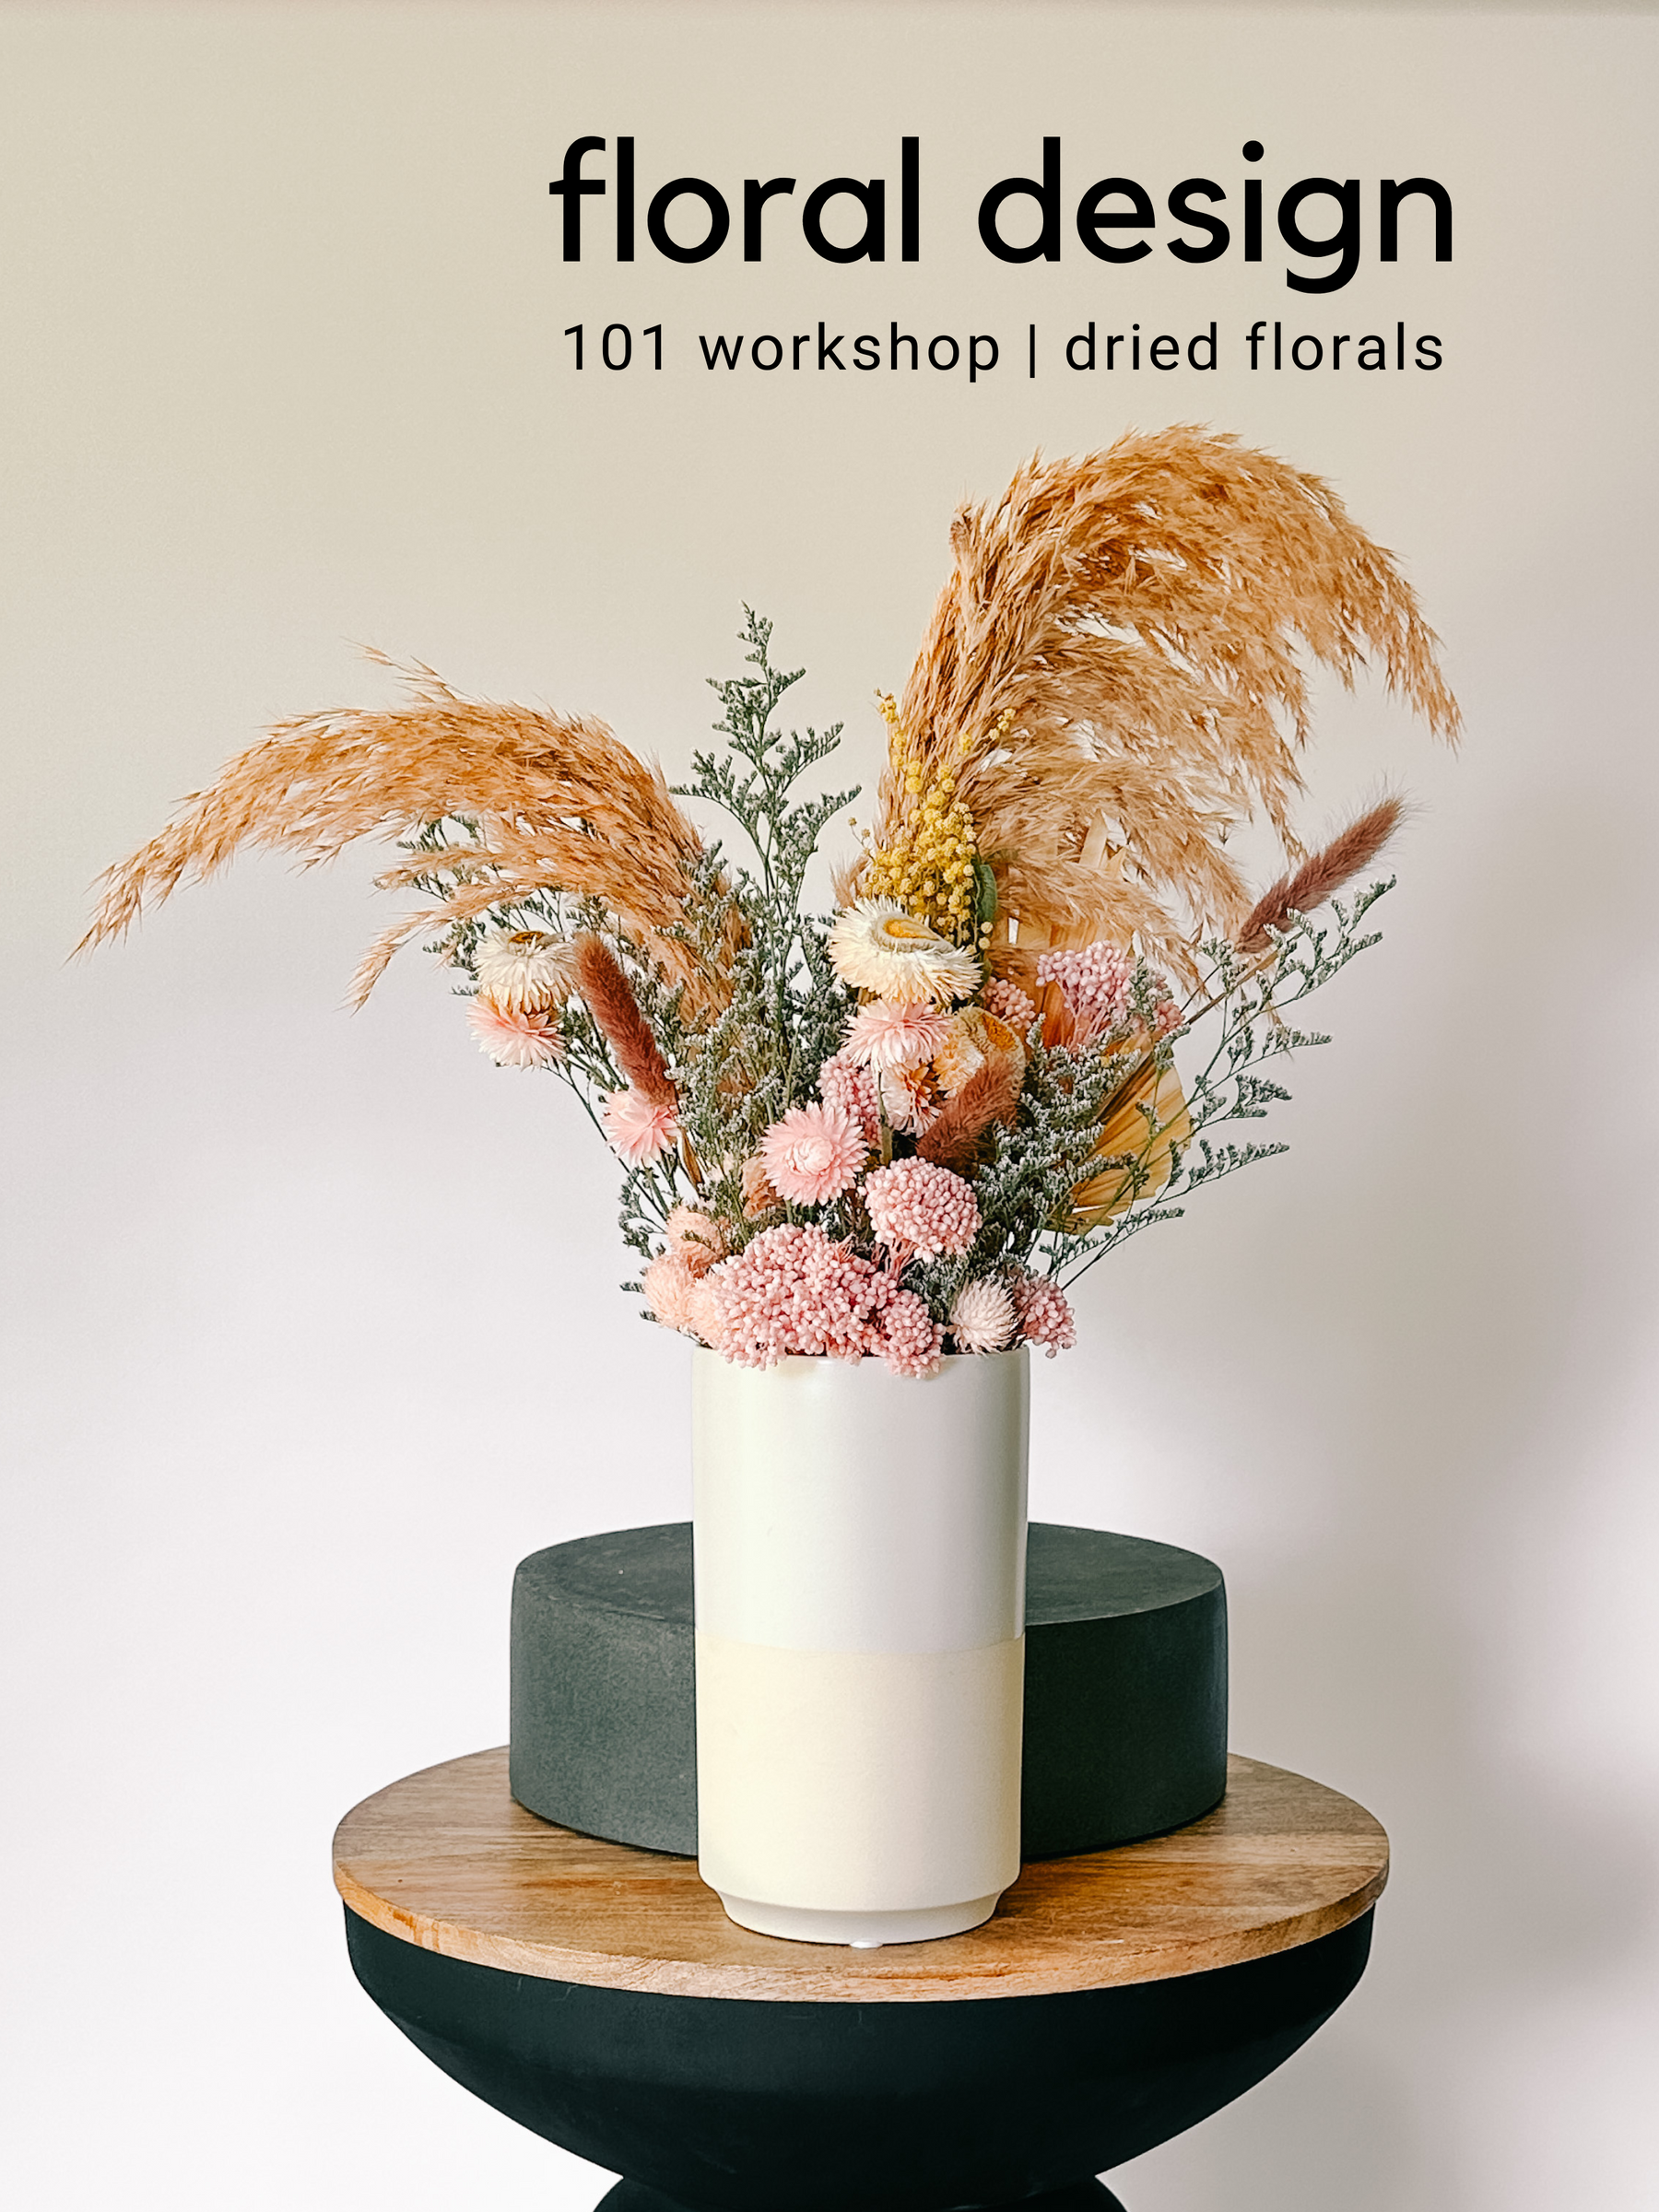 Designing with Dried Florals | June 10th 11:30am